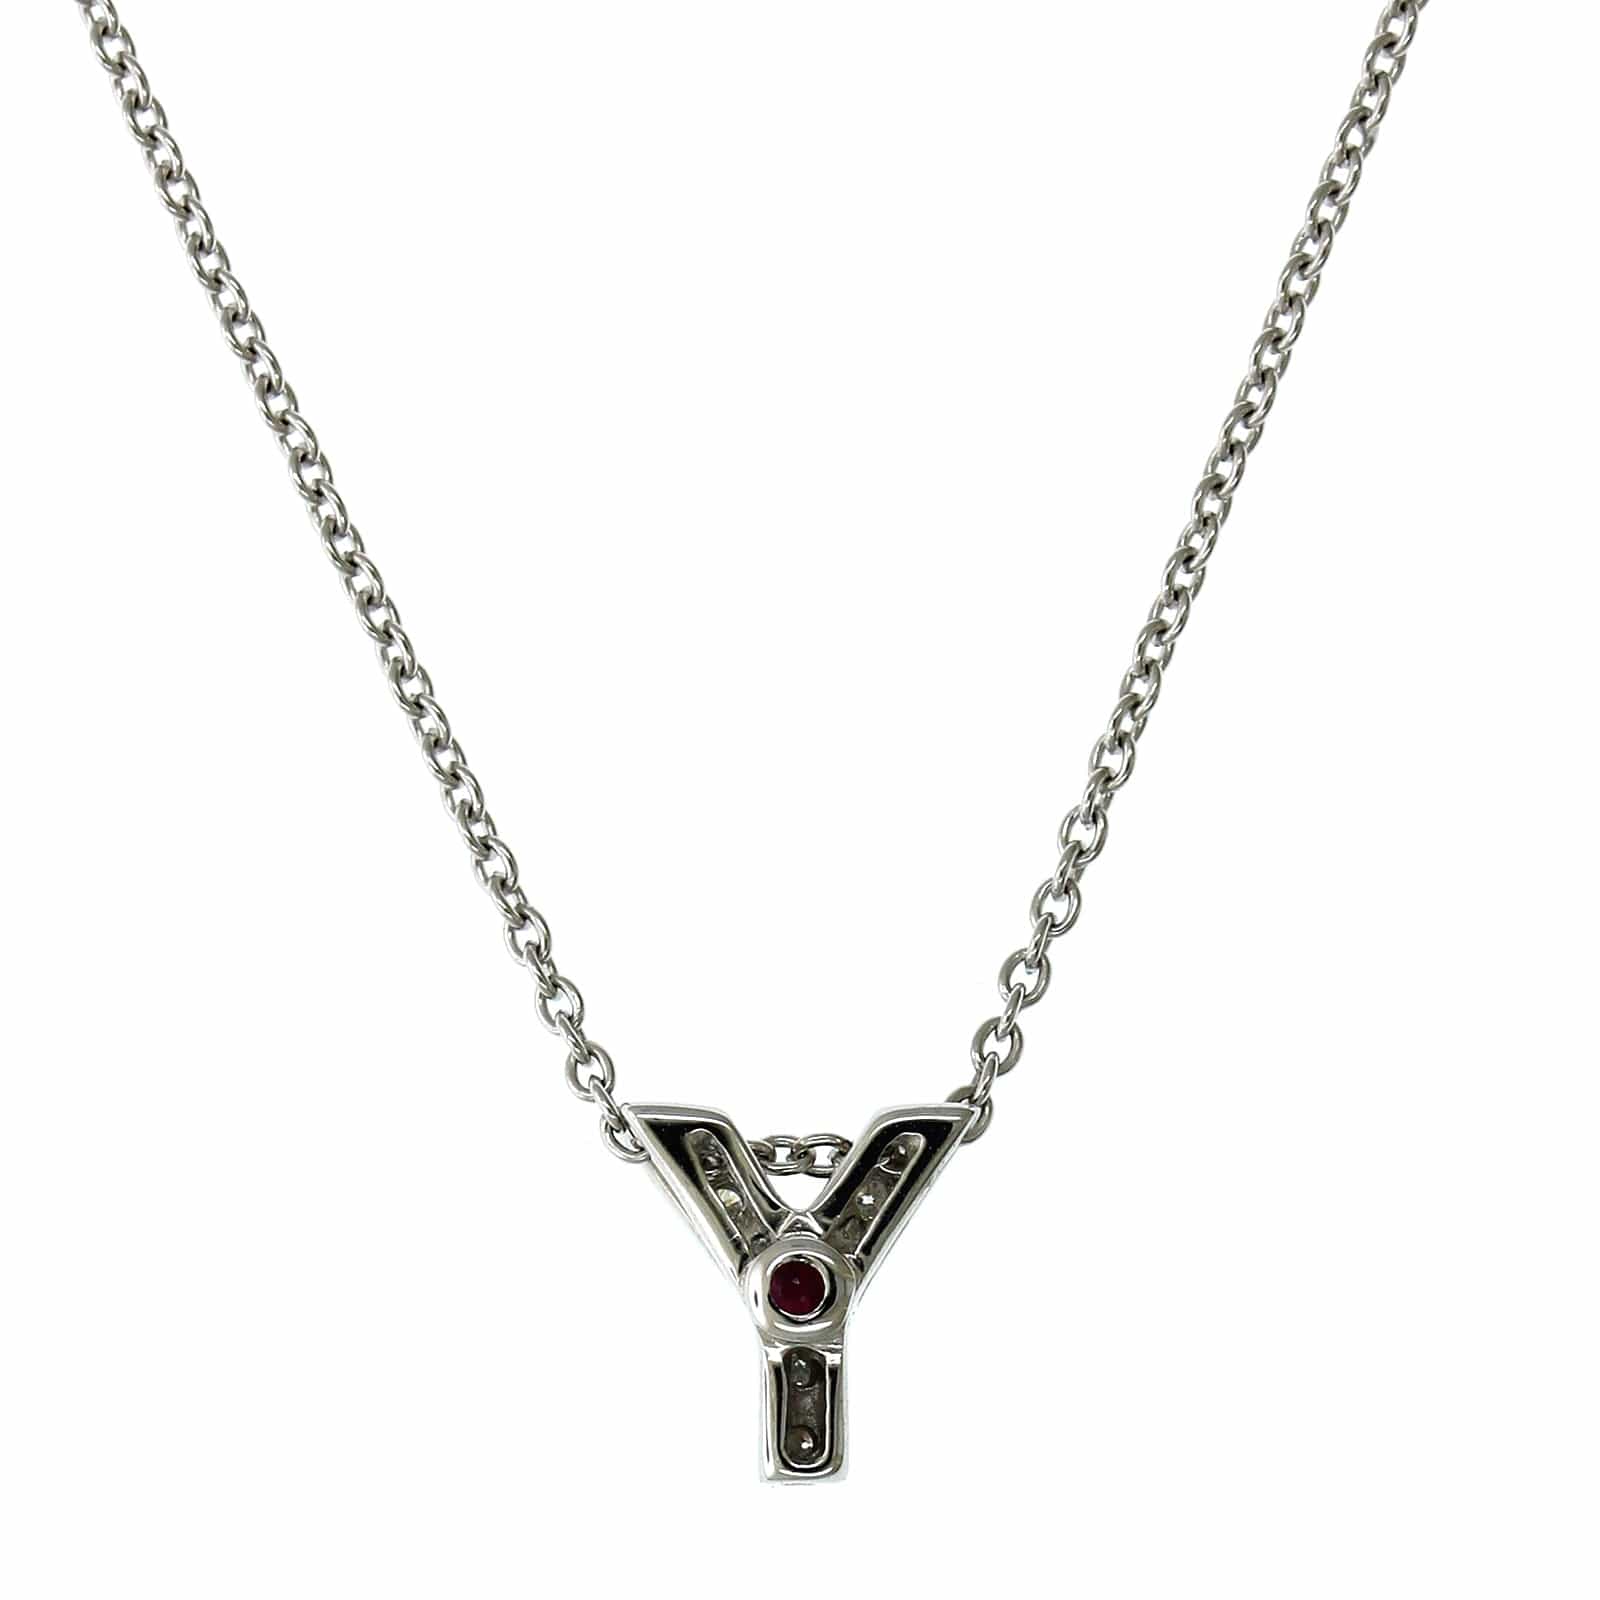 Roberto Coin 18K White Gold "Y" Initial Diamond Necklace